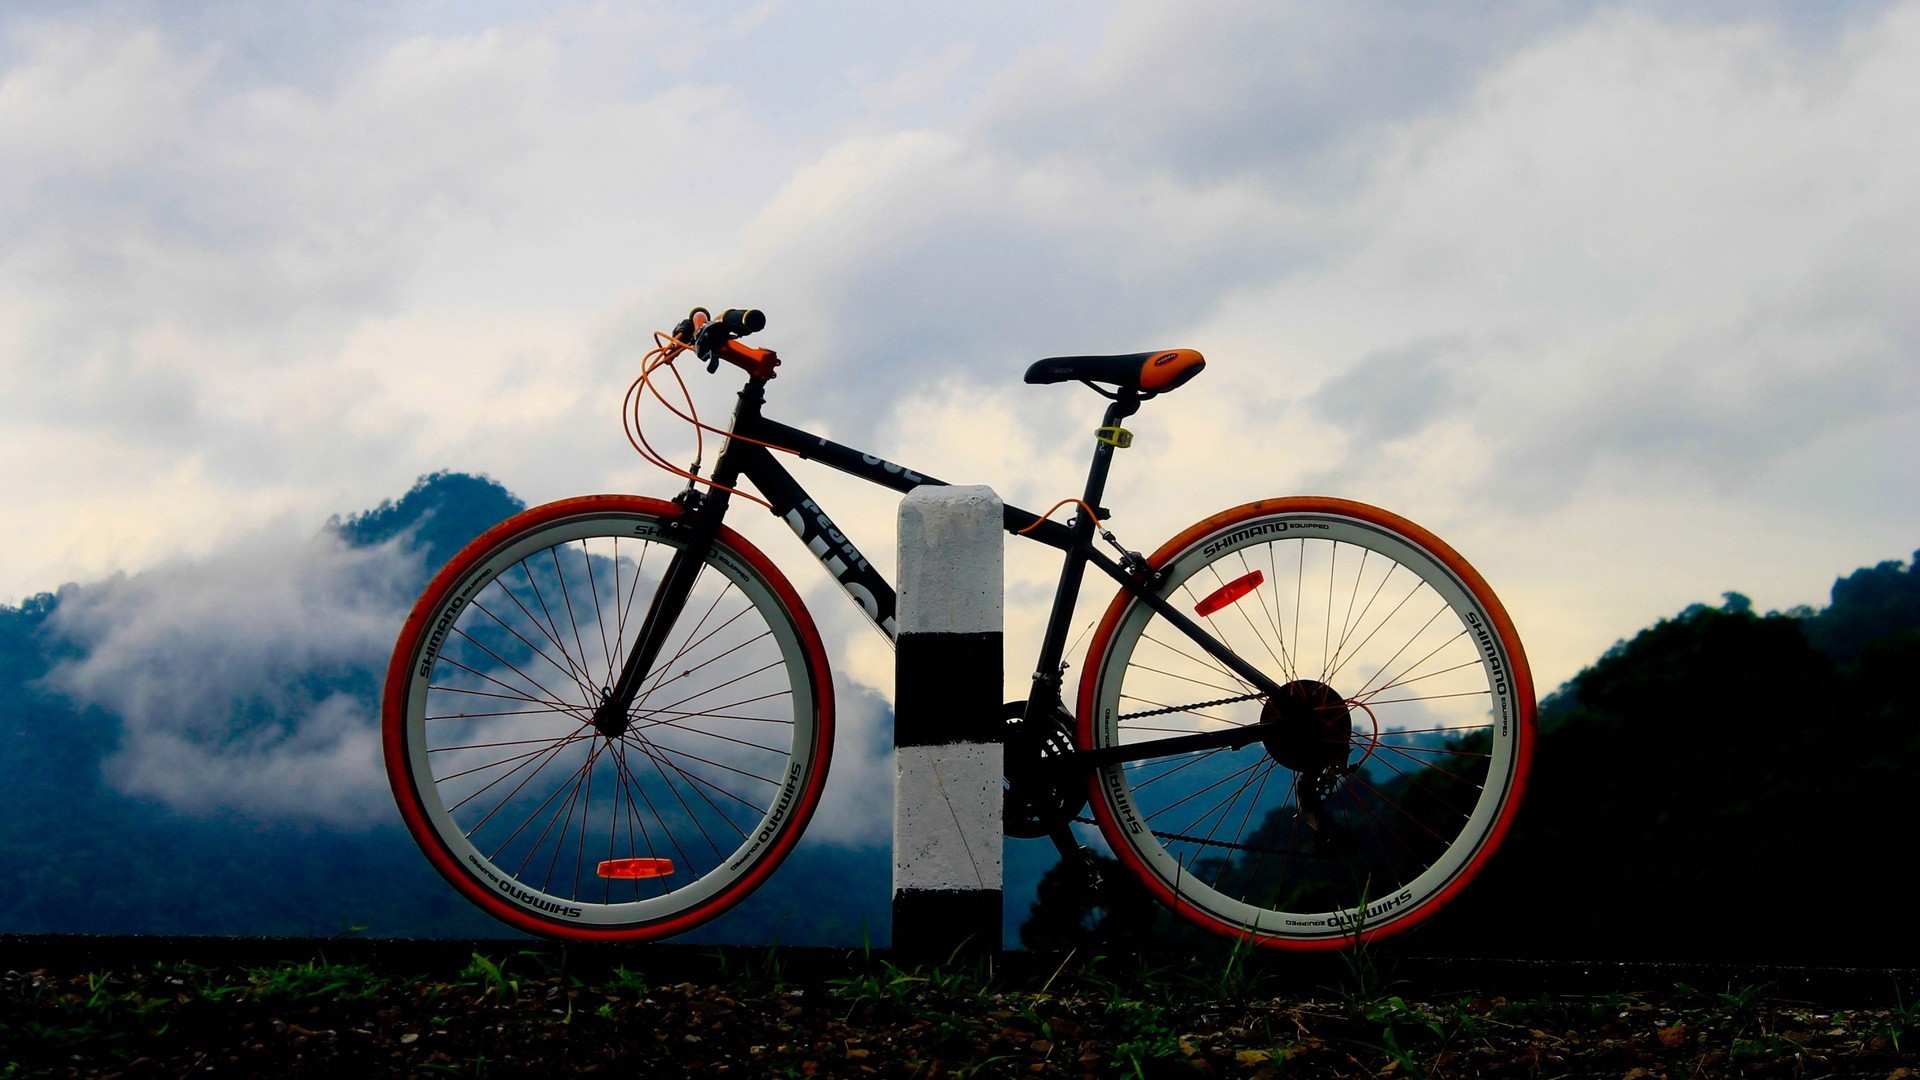 General 1920x1080 bicycle vehicle clouds outdoors